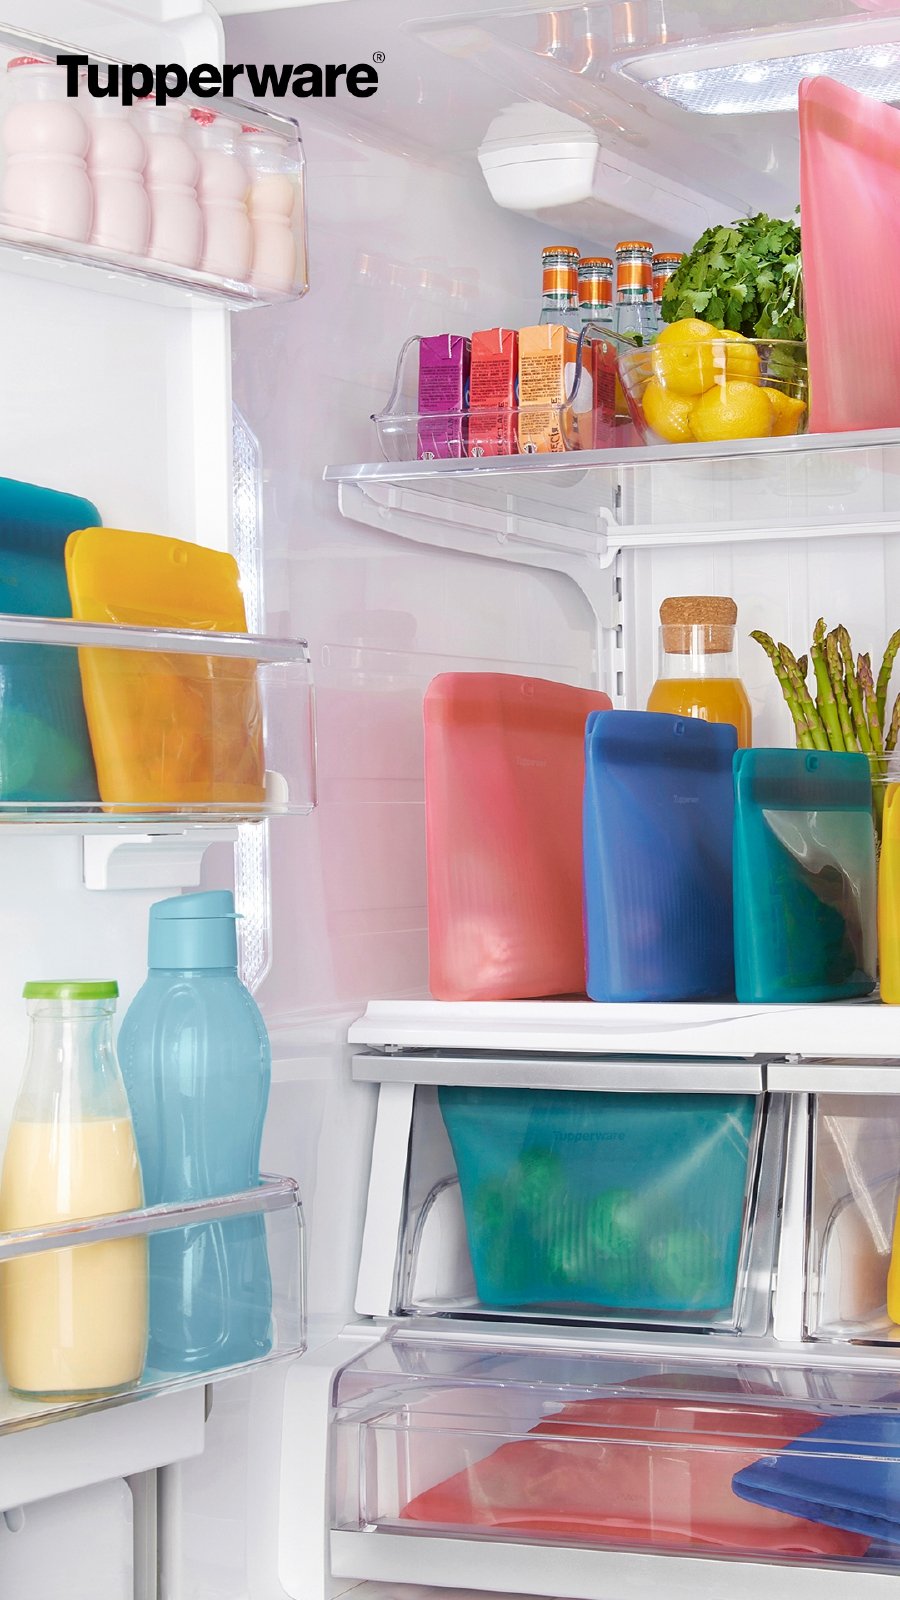 Tupperware continues to reinvent itself